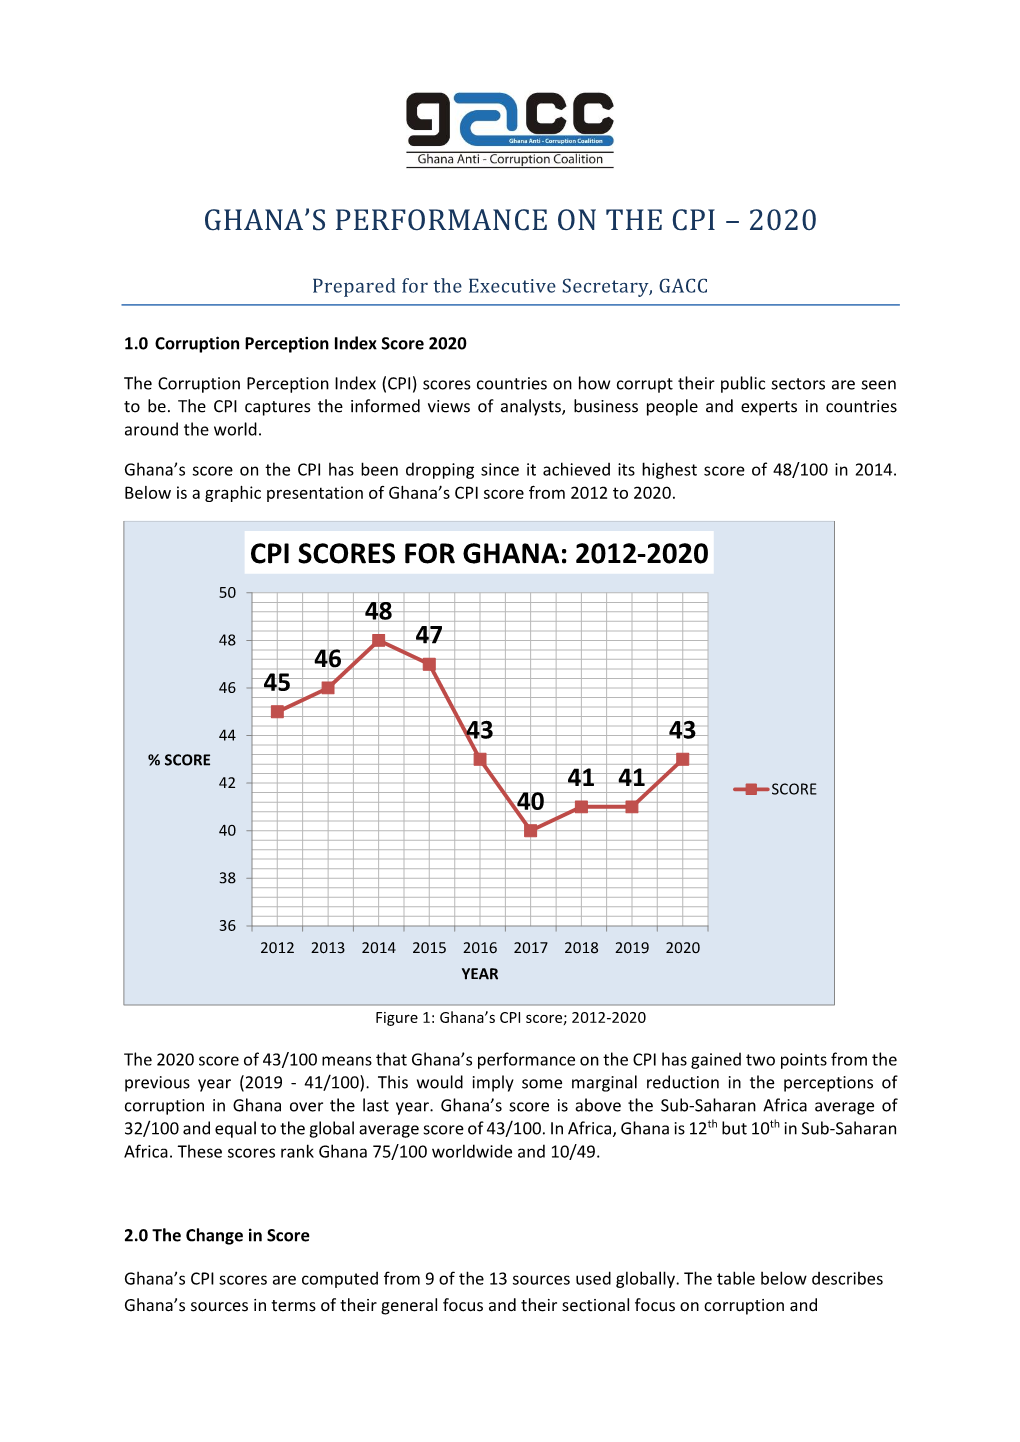 Analysis of Ghana's Performance on the CPI 2020